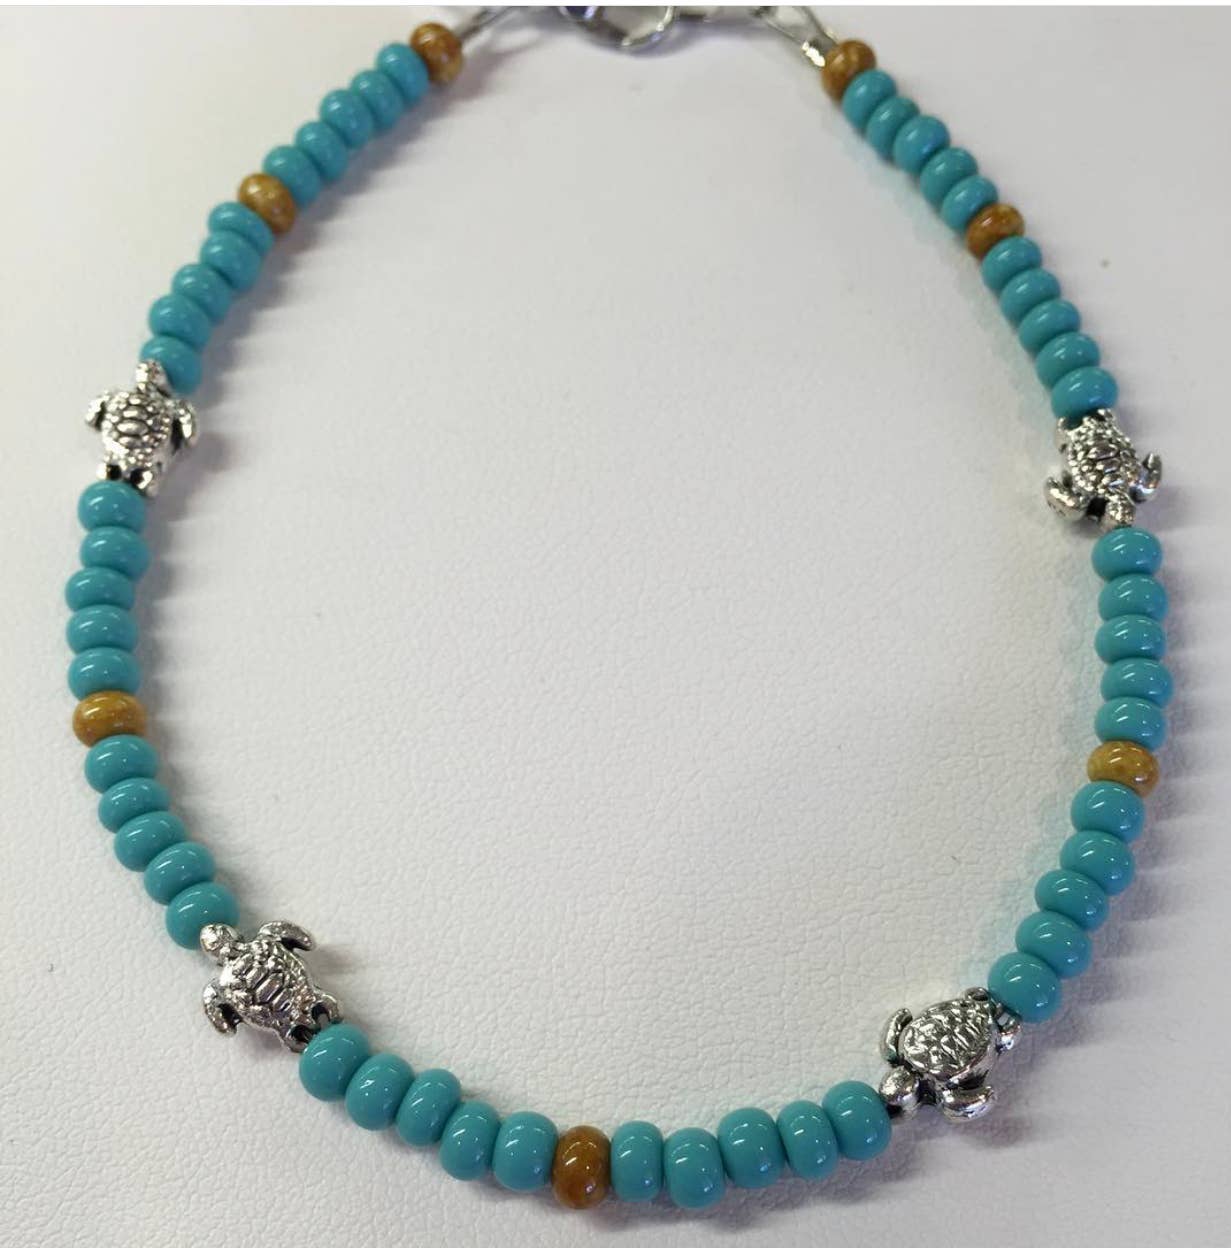 Sea Turtle Anklet in Turquoise